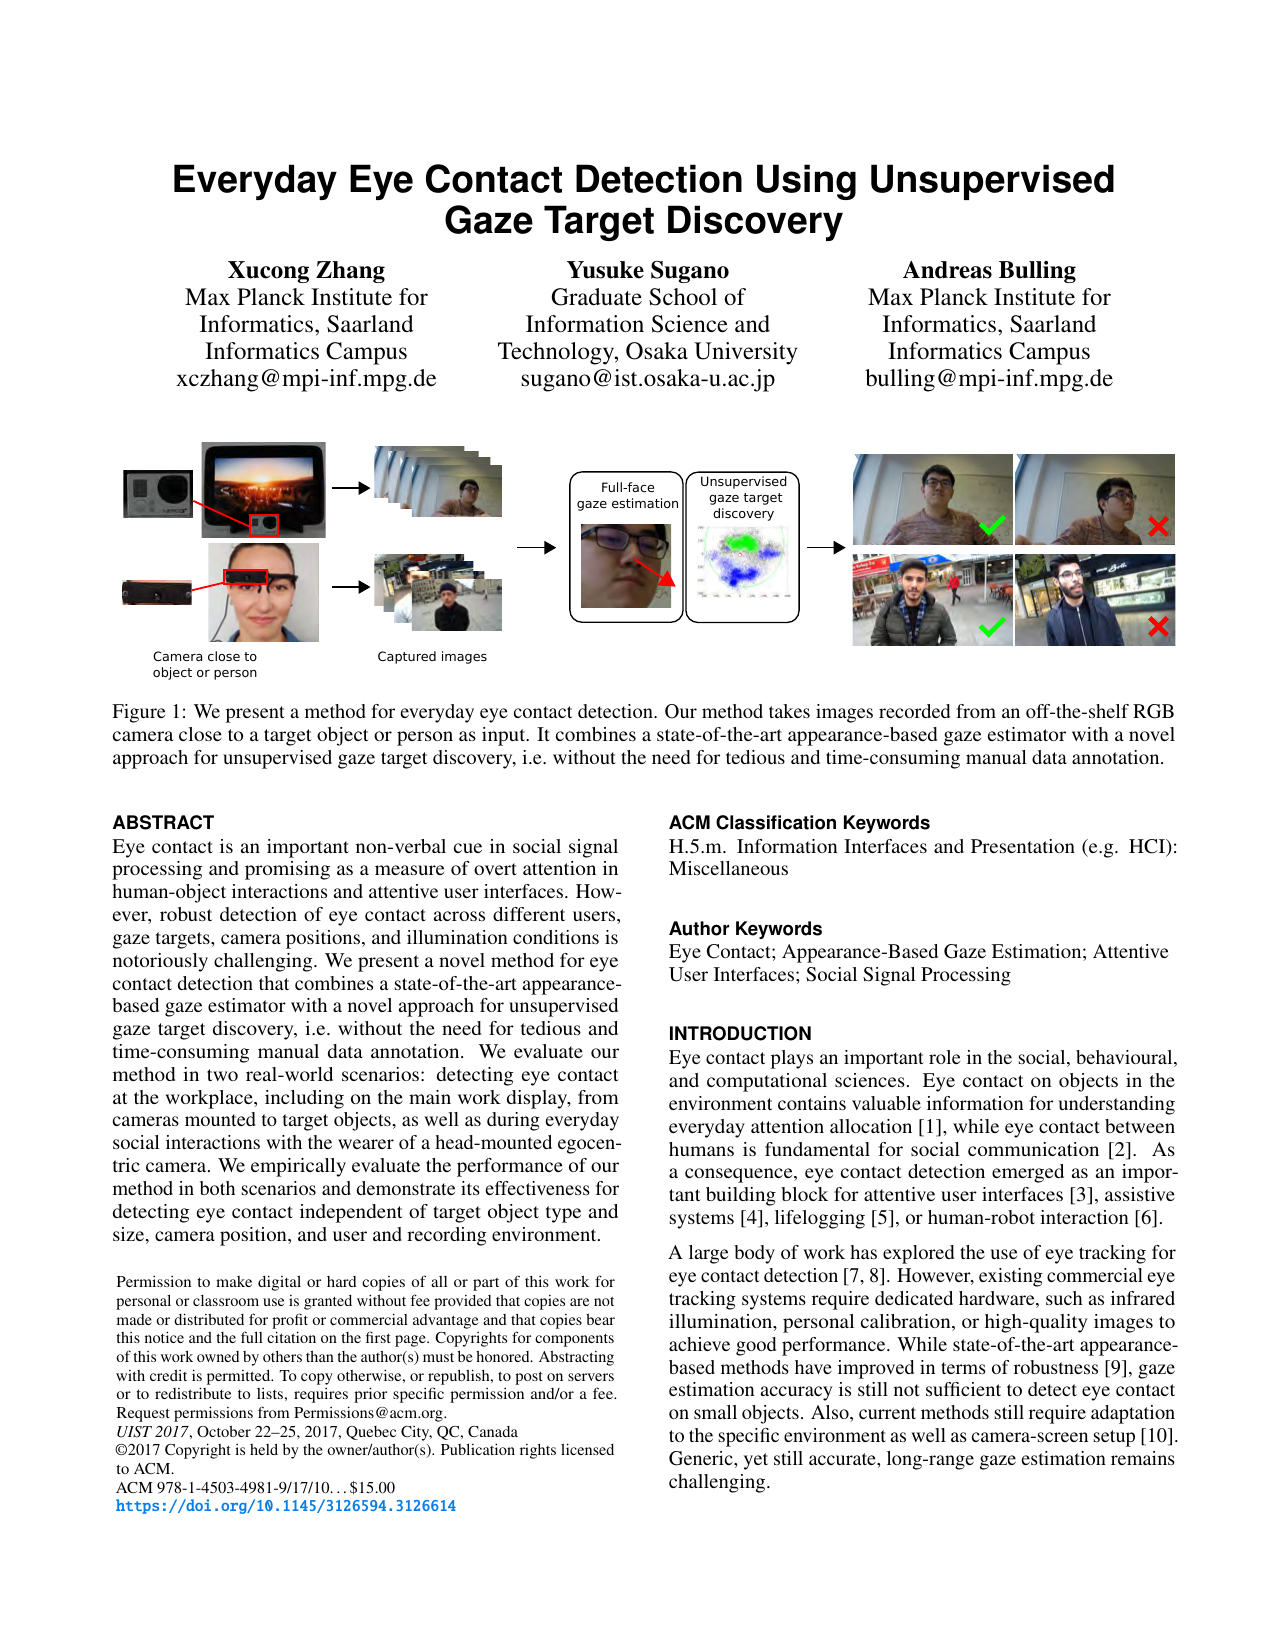 Everyday Eye Contact Detection Using Unsupervised Gaze Target Discovery